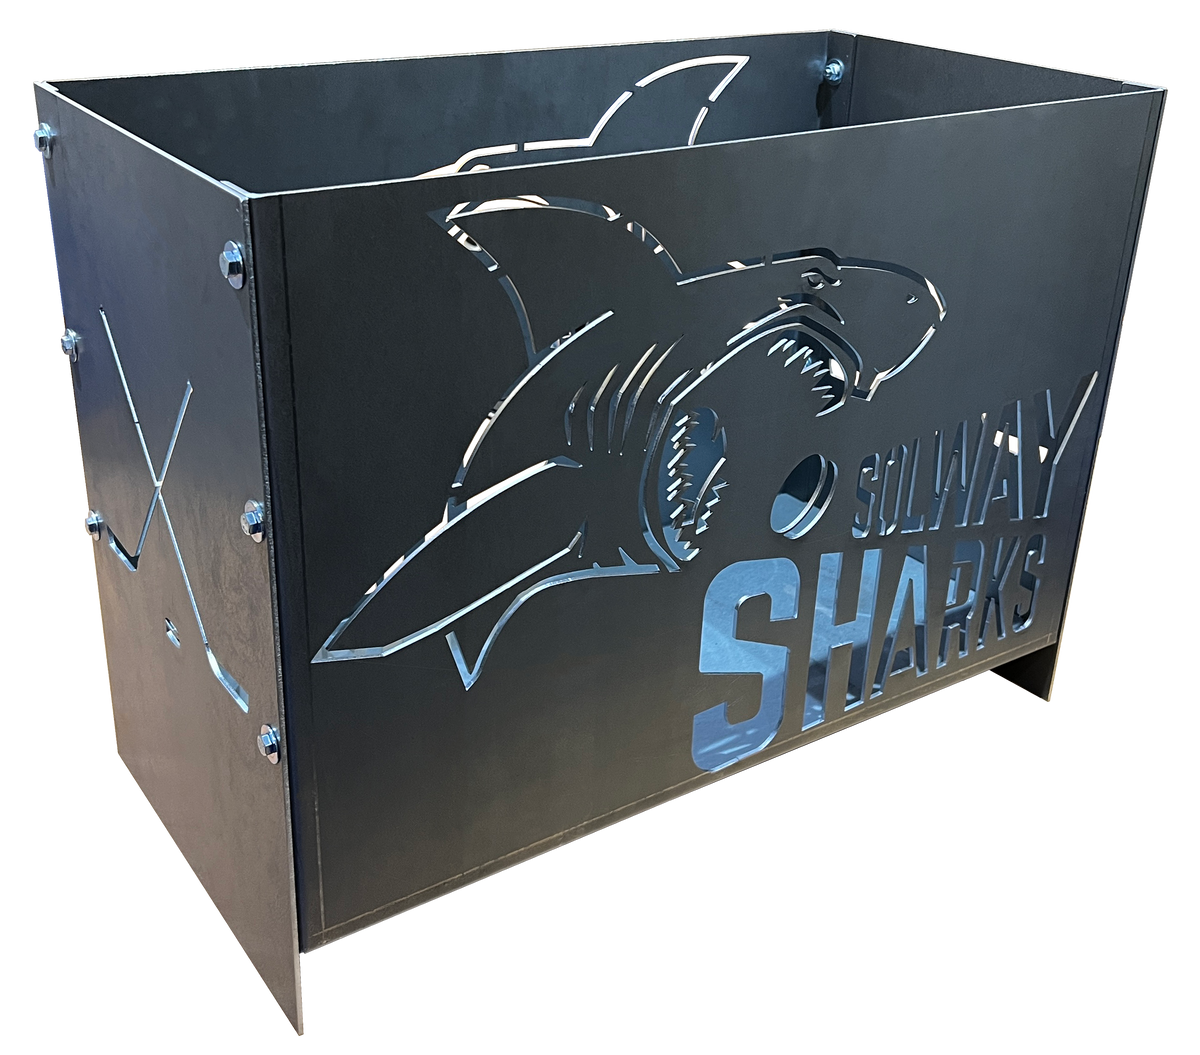 Solway Sharks Fire Pit